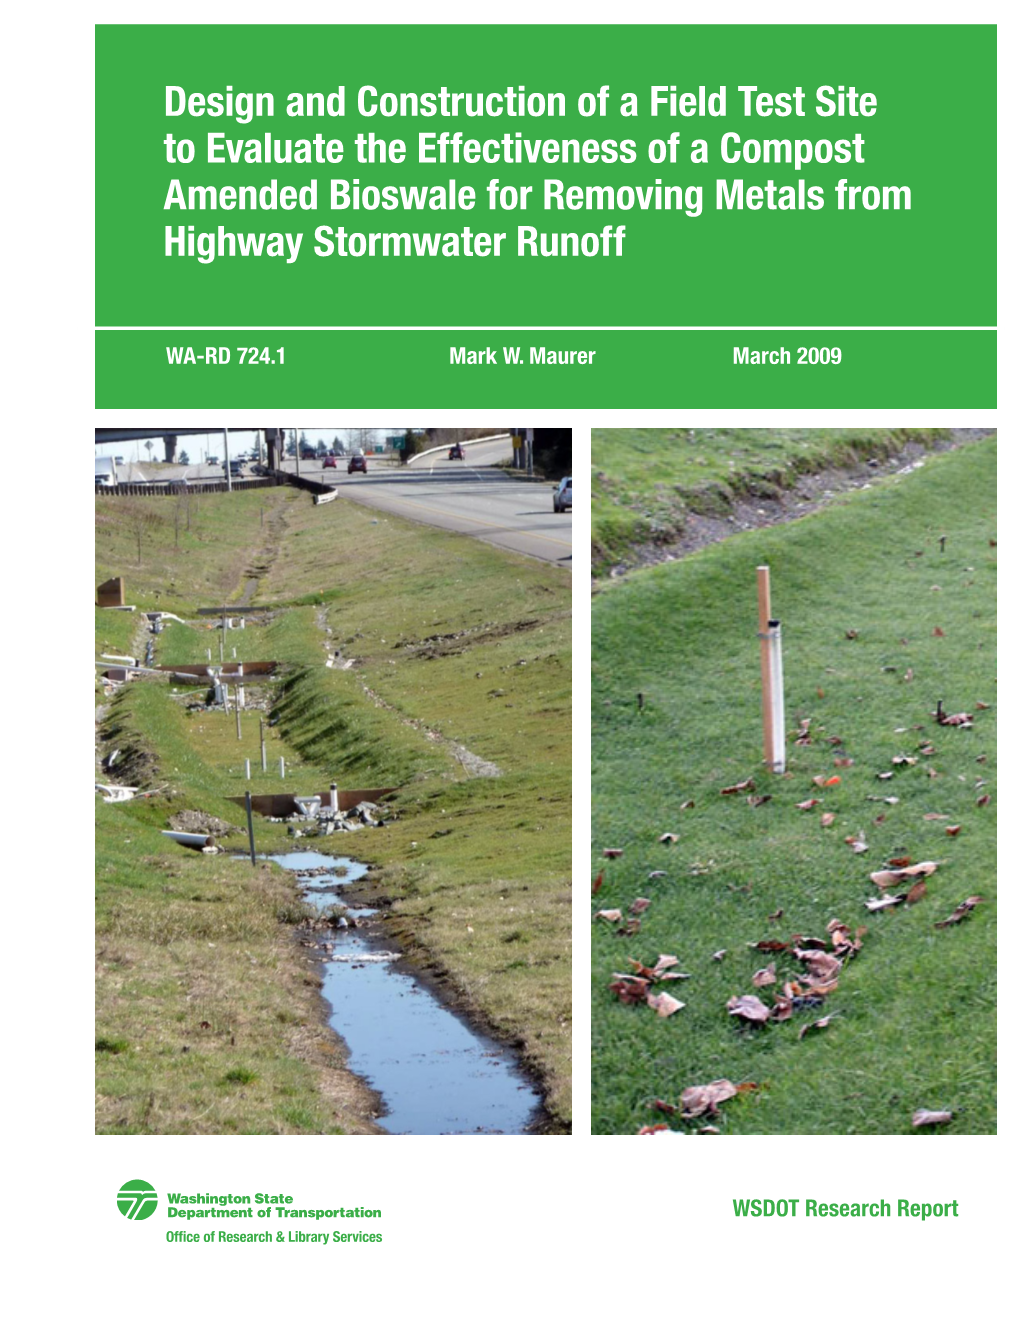 Design and Construction of a Field Test Site to Evaluate the Effectiveness of a Compost Amended Bioswale for Removing Metals from Highway Stormwater Runoff